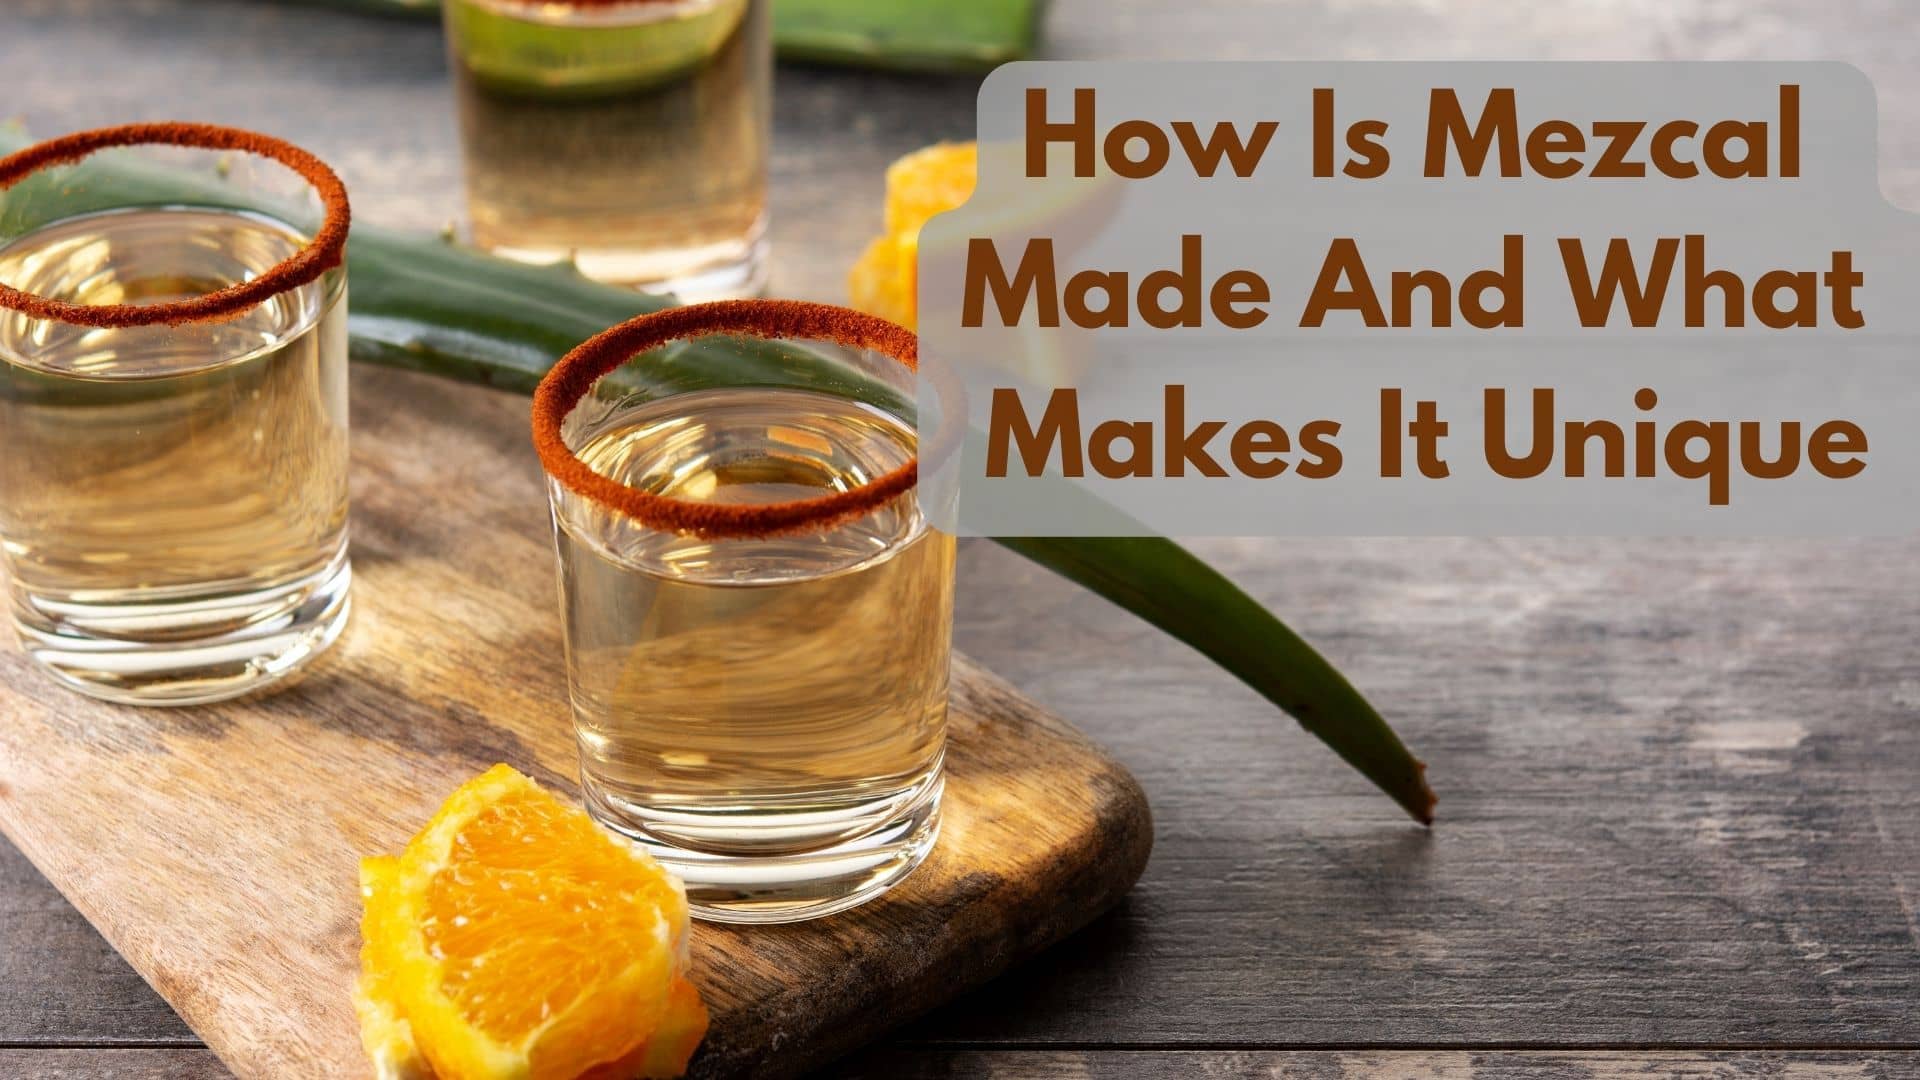 How Is Mezcal Made And What Makes It Unique